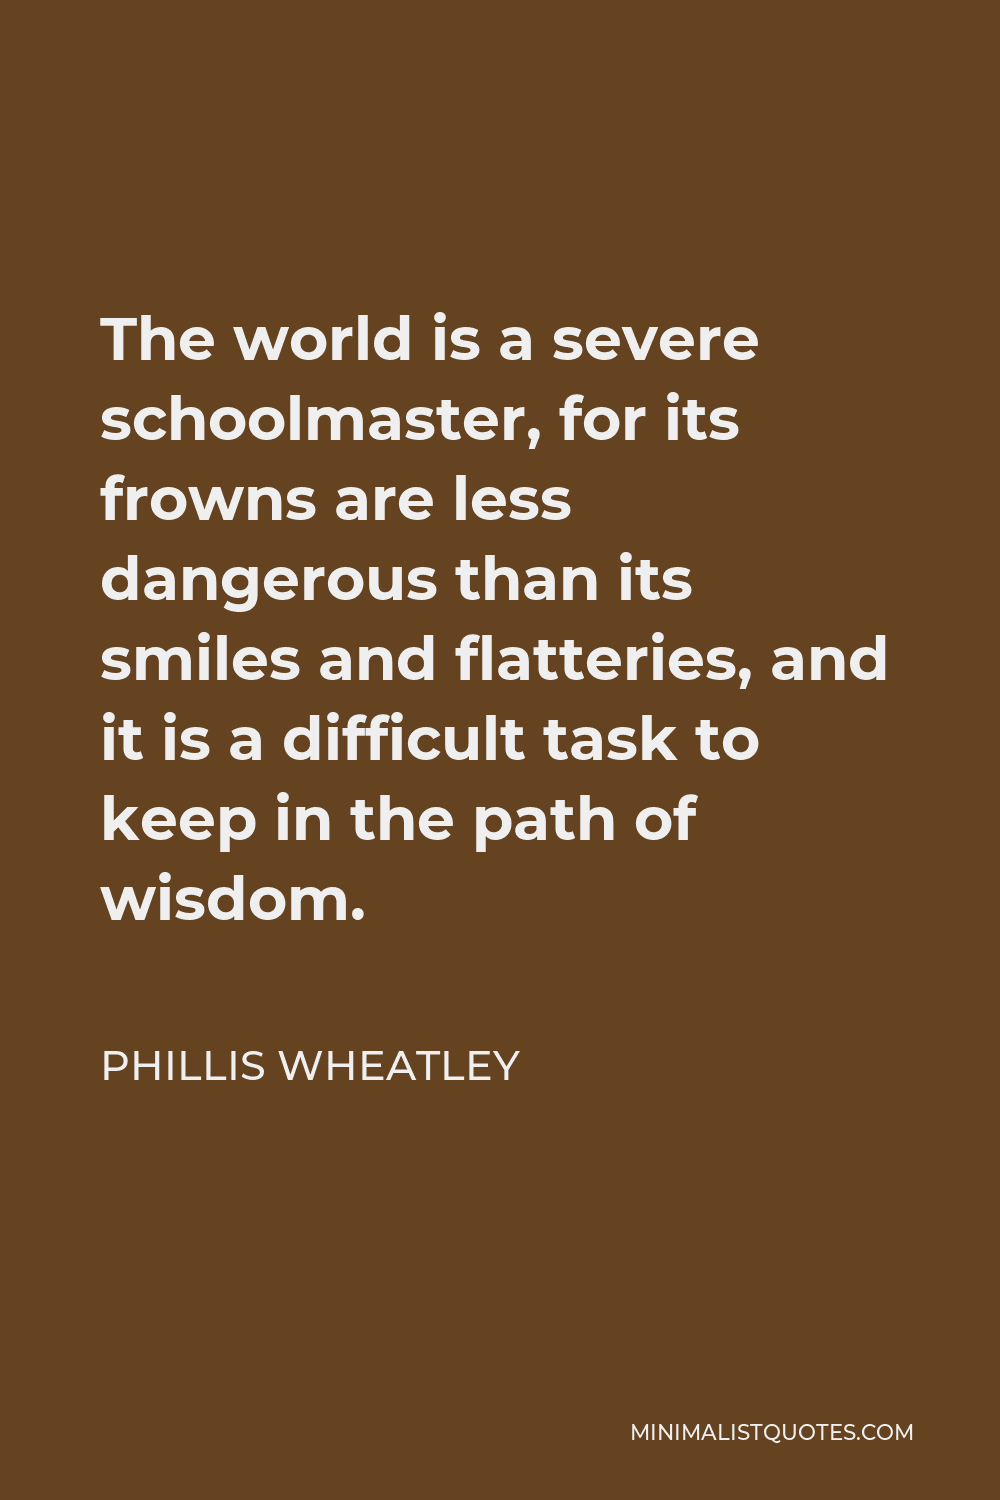 Phillis Wheatley Quote - The world is a severe schoolmaster, for its frowns are less dangerous than its smiles and flatteries, and it is a difficult task to keep in the path of wisdom.